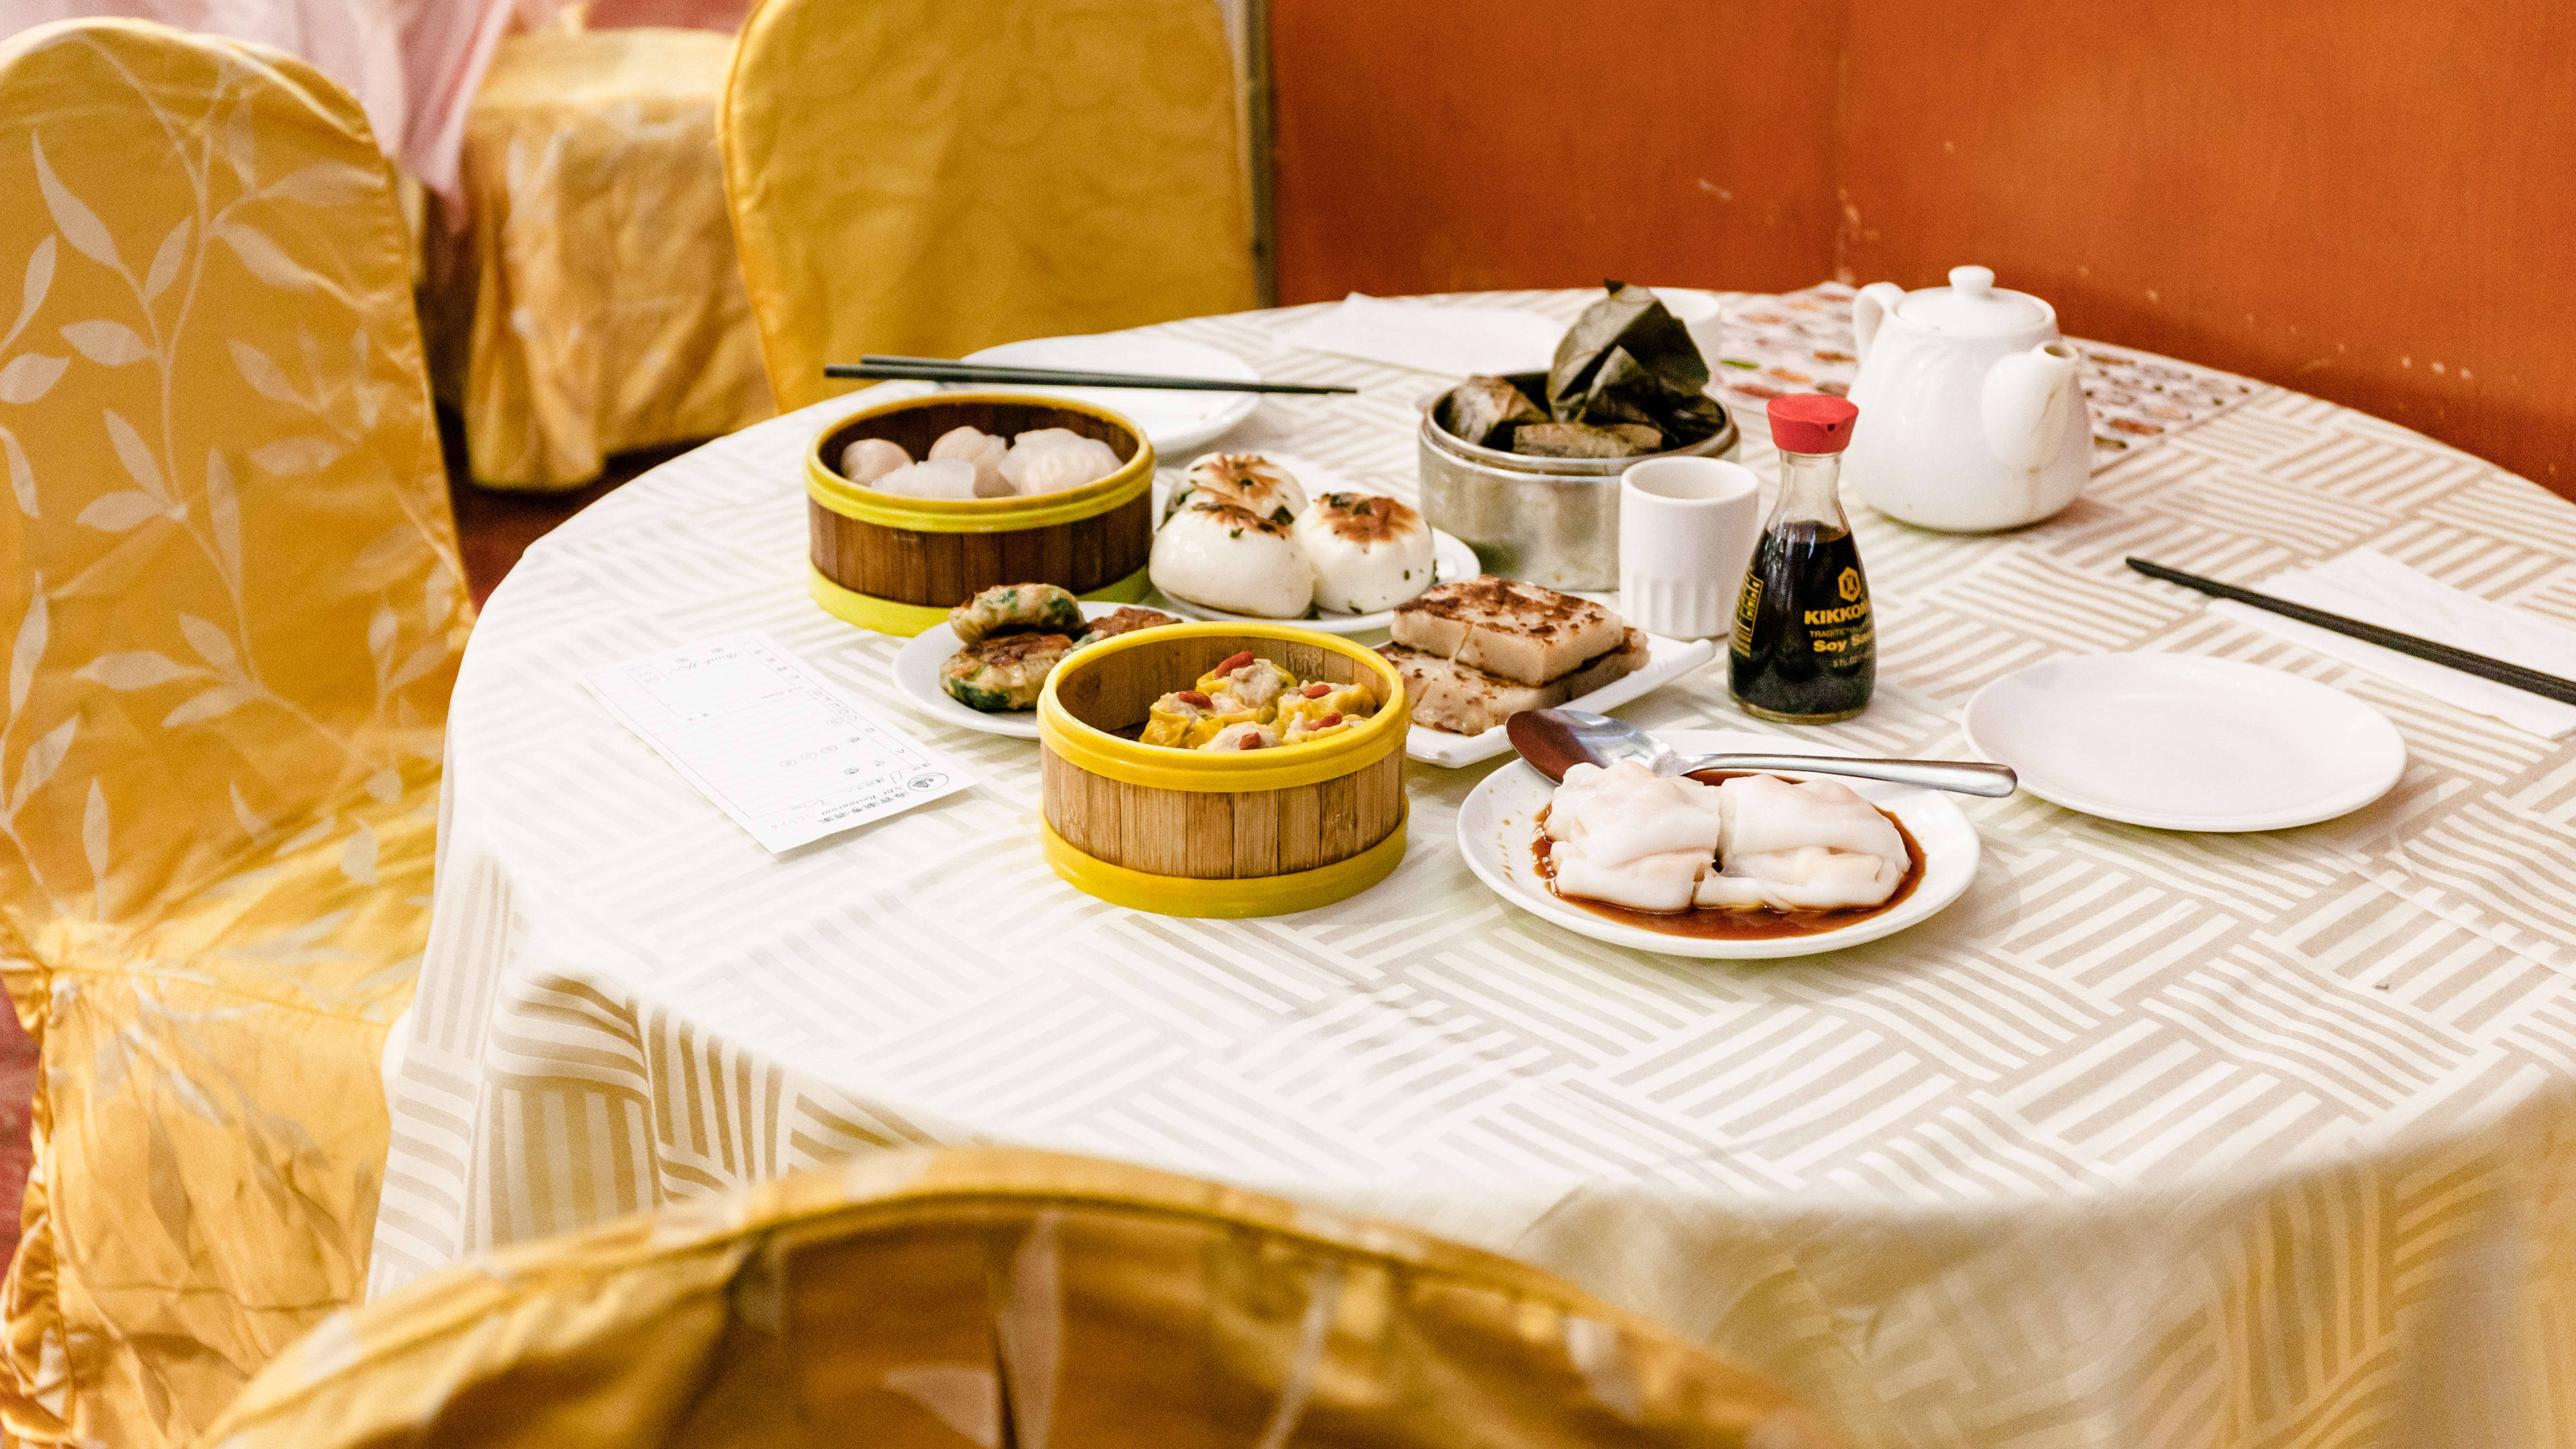 A spread of dishes on plates and in steamer baskets on a white clothed round table with gold fabric covered chairs.